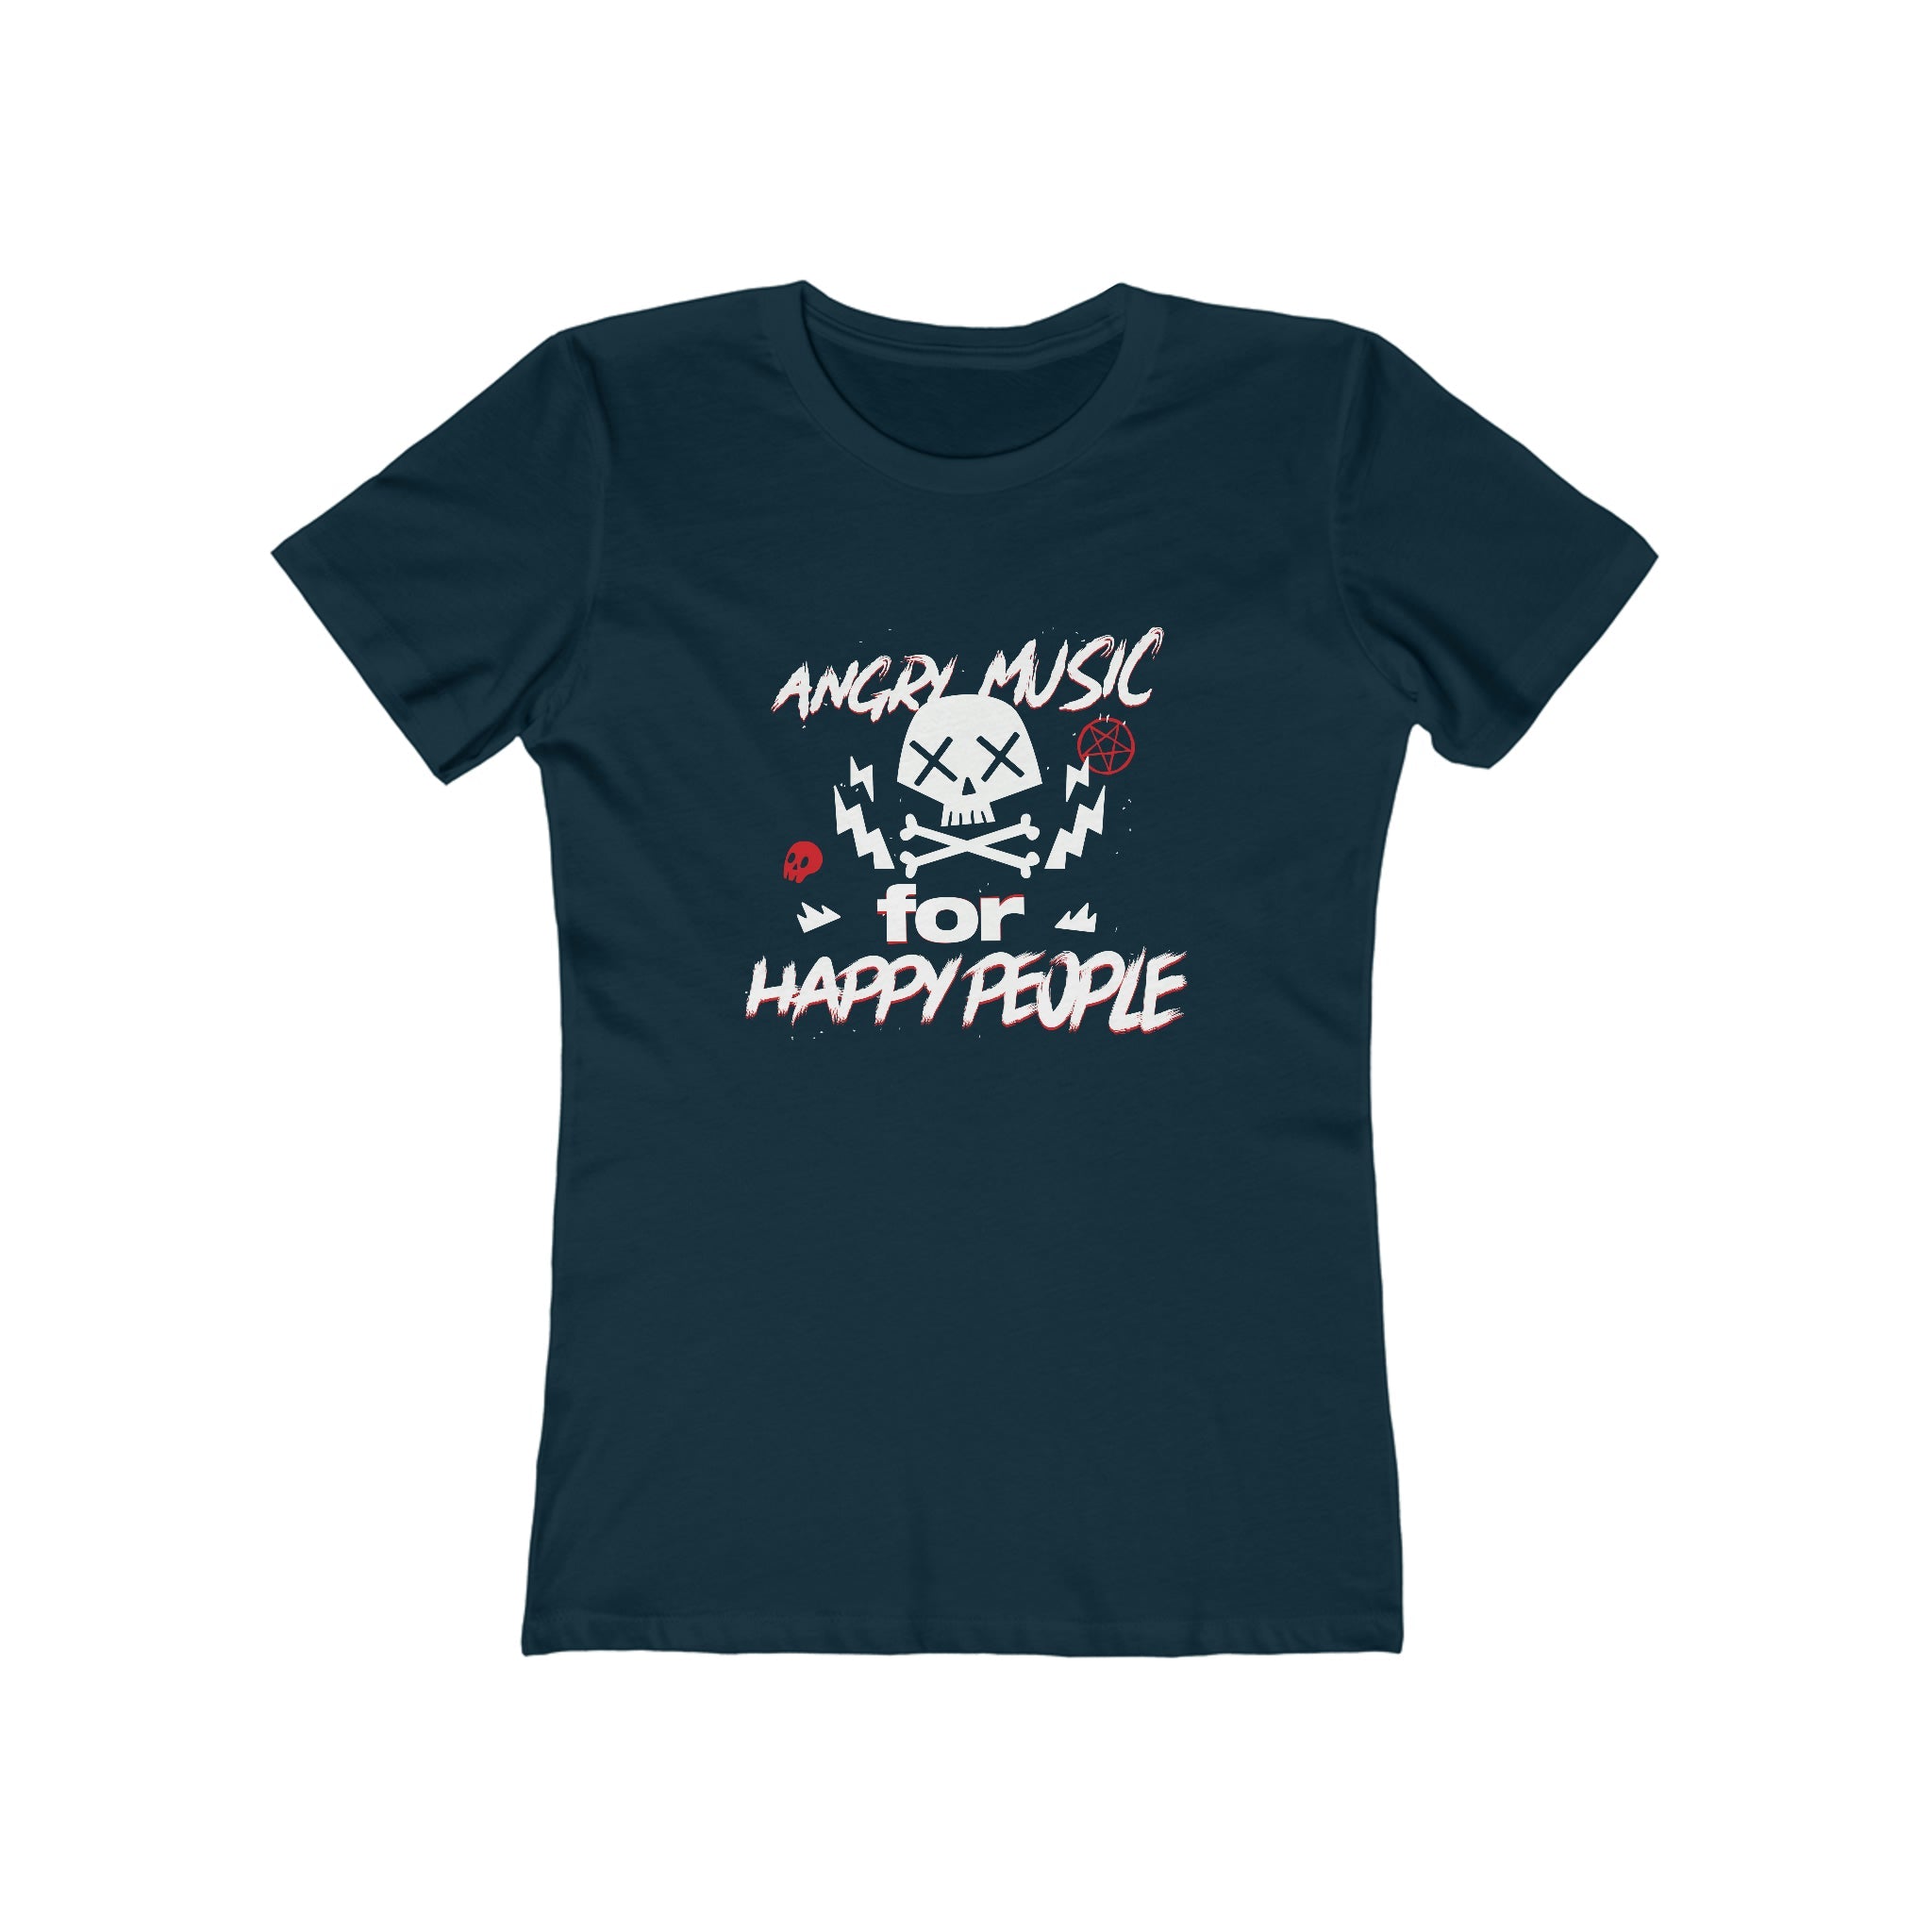 Angry Music for Happy People : Women's 100% Cotton T-Shirt